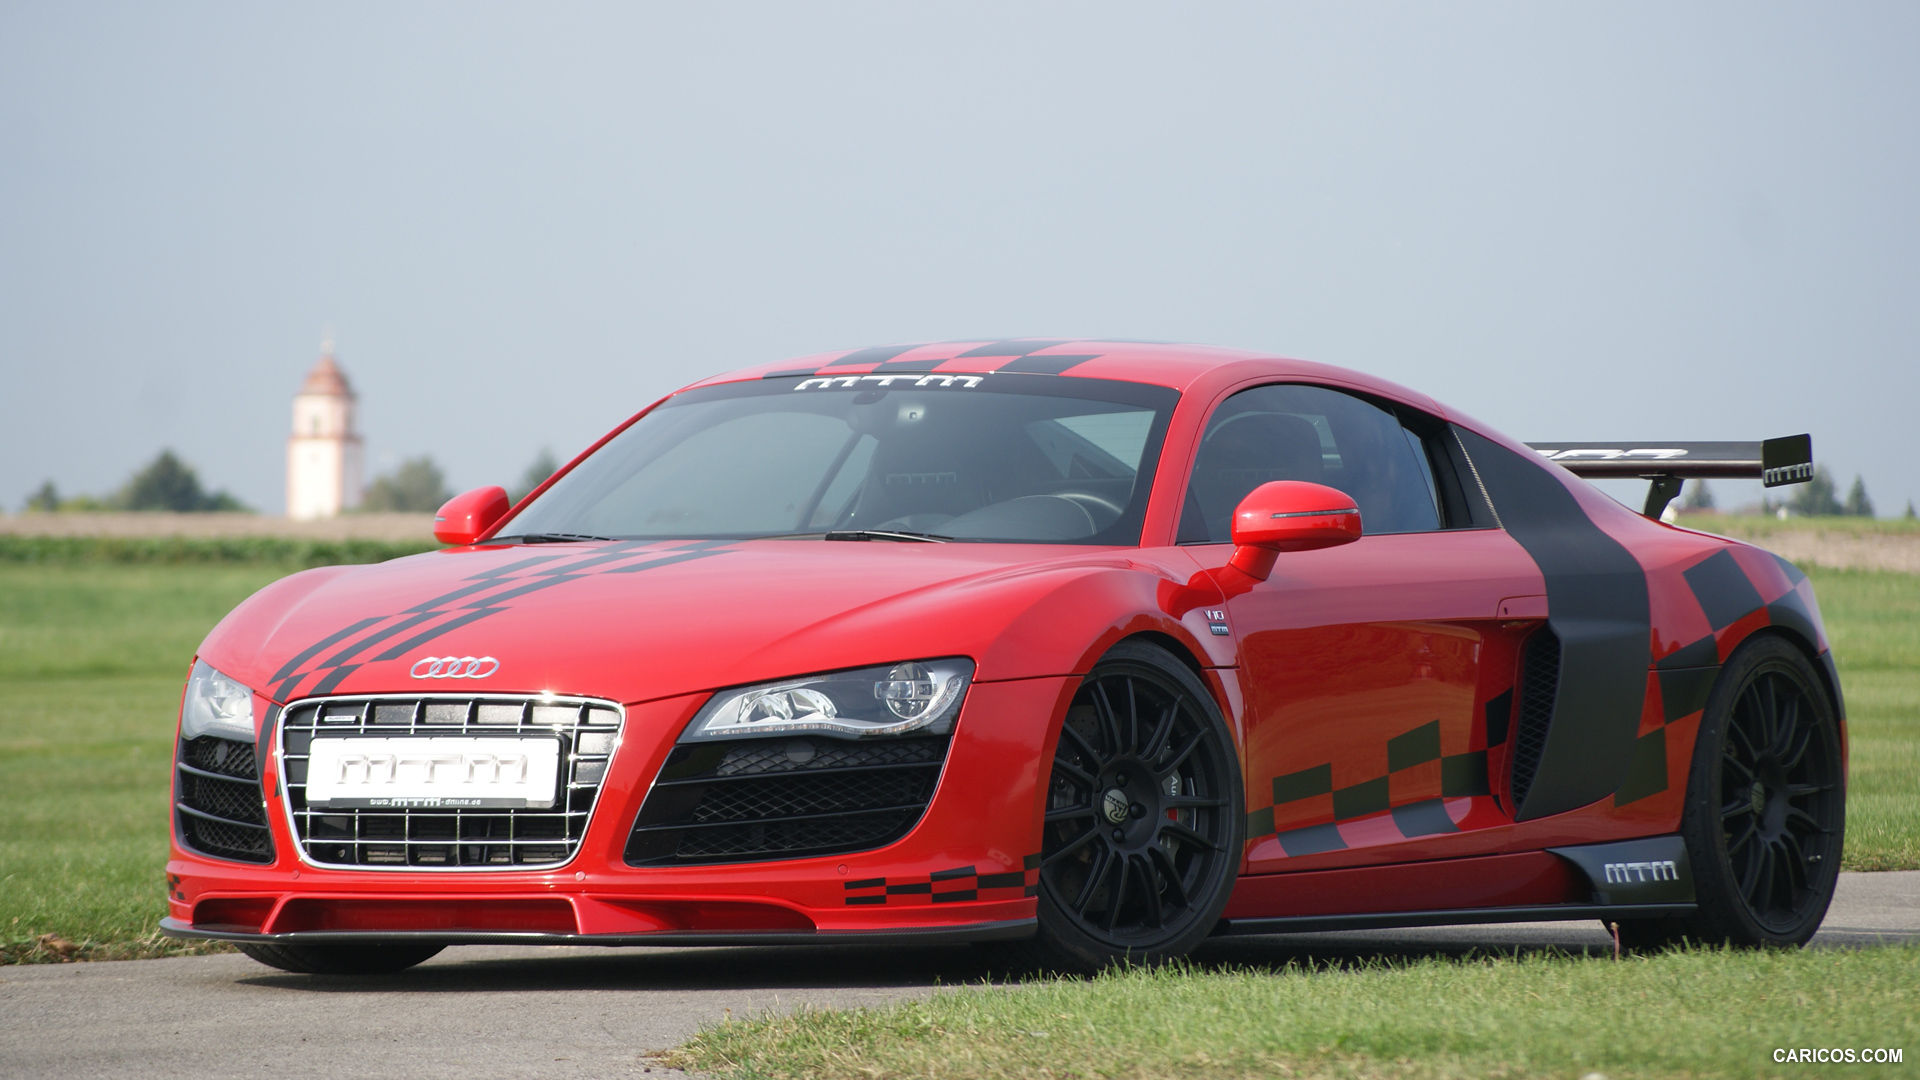 MTM Audi R8 V10 (2013) Coupe - Front, #16 of 21